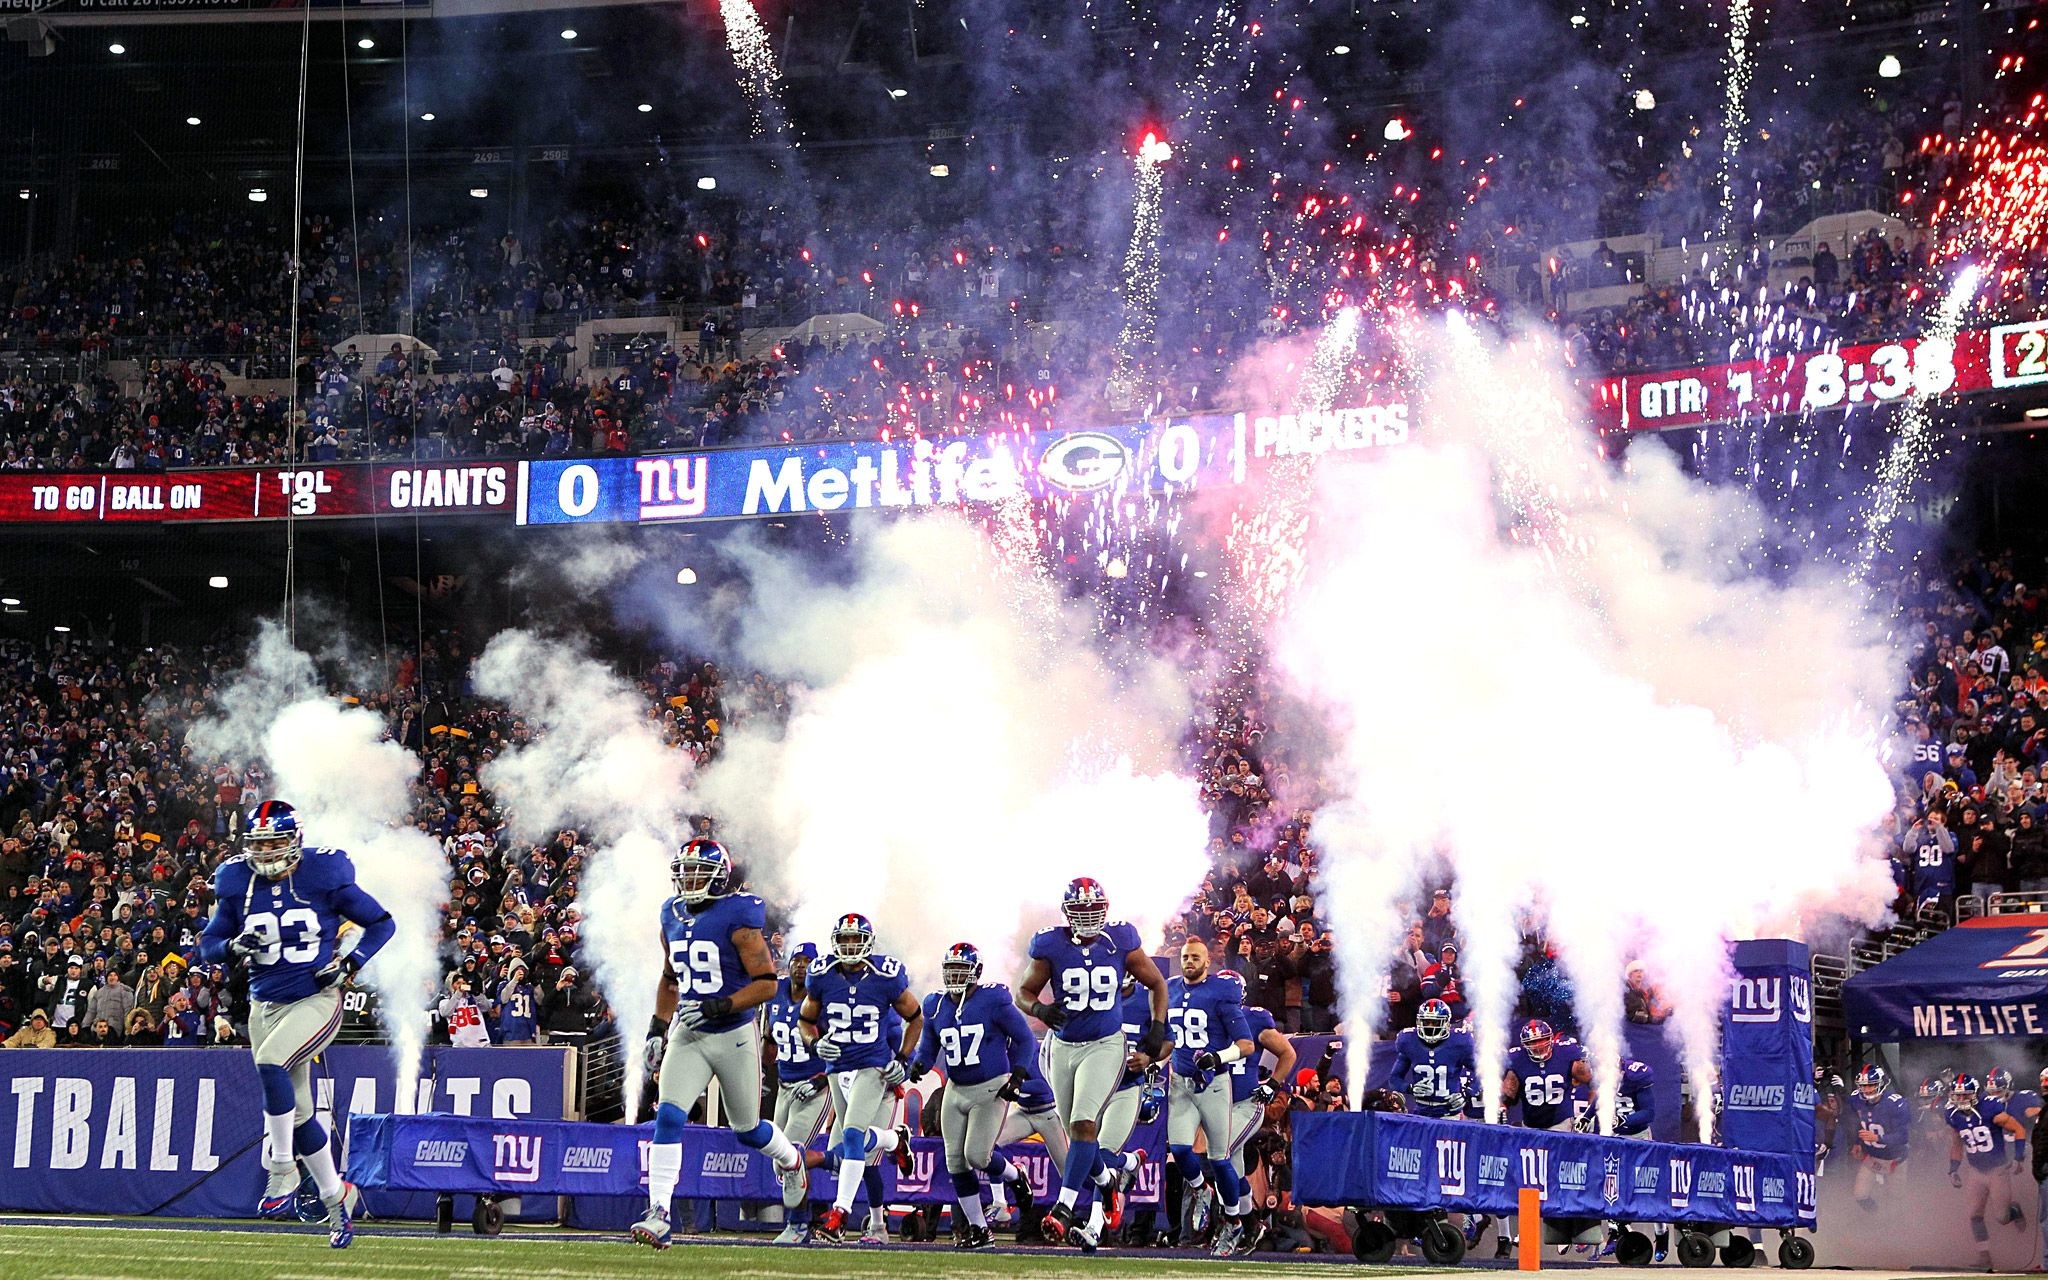 2048x1280 1920x1080 New York Giants Wallpapers 72+ - Page 3 of 3 - xshyfc.com">